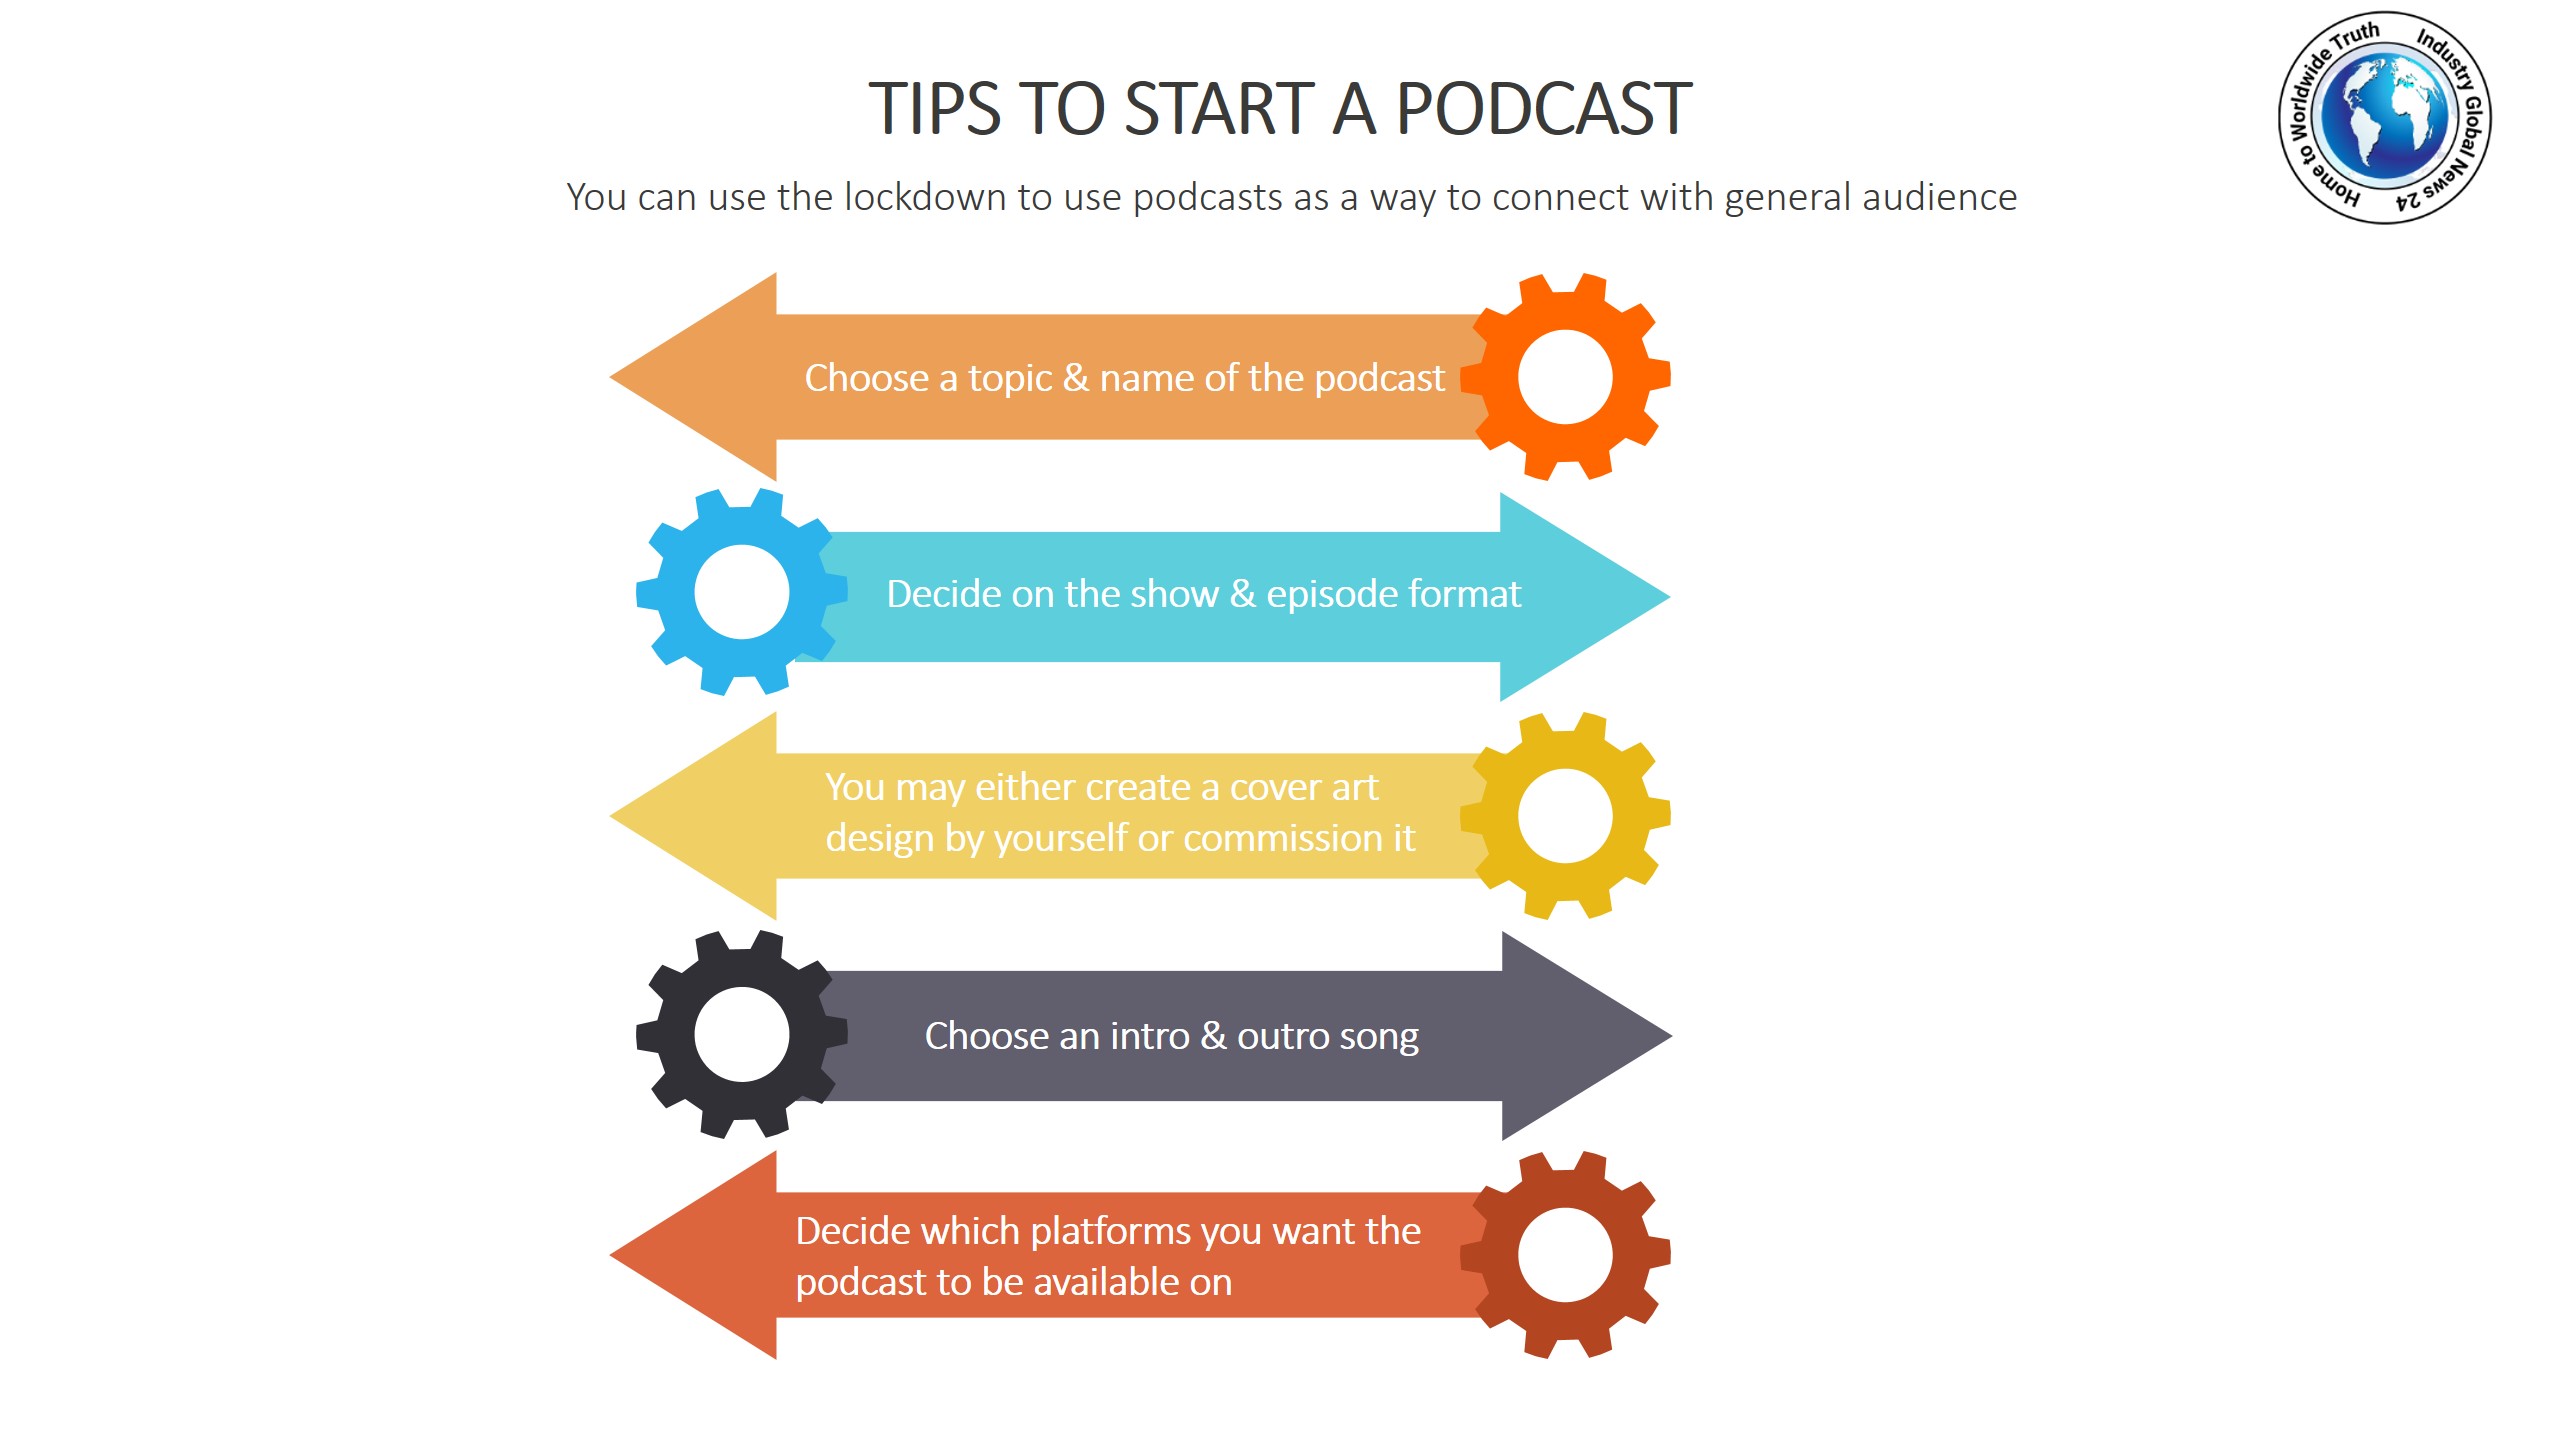 Tips to start a podcast